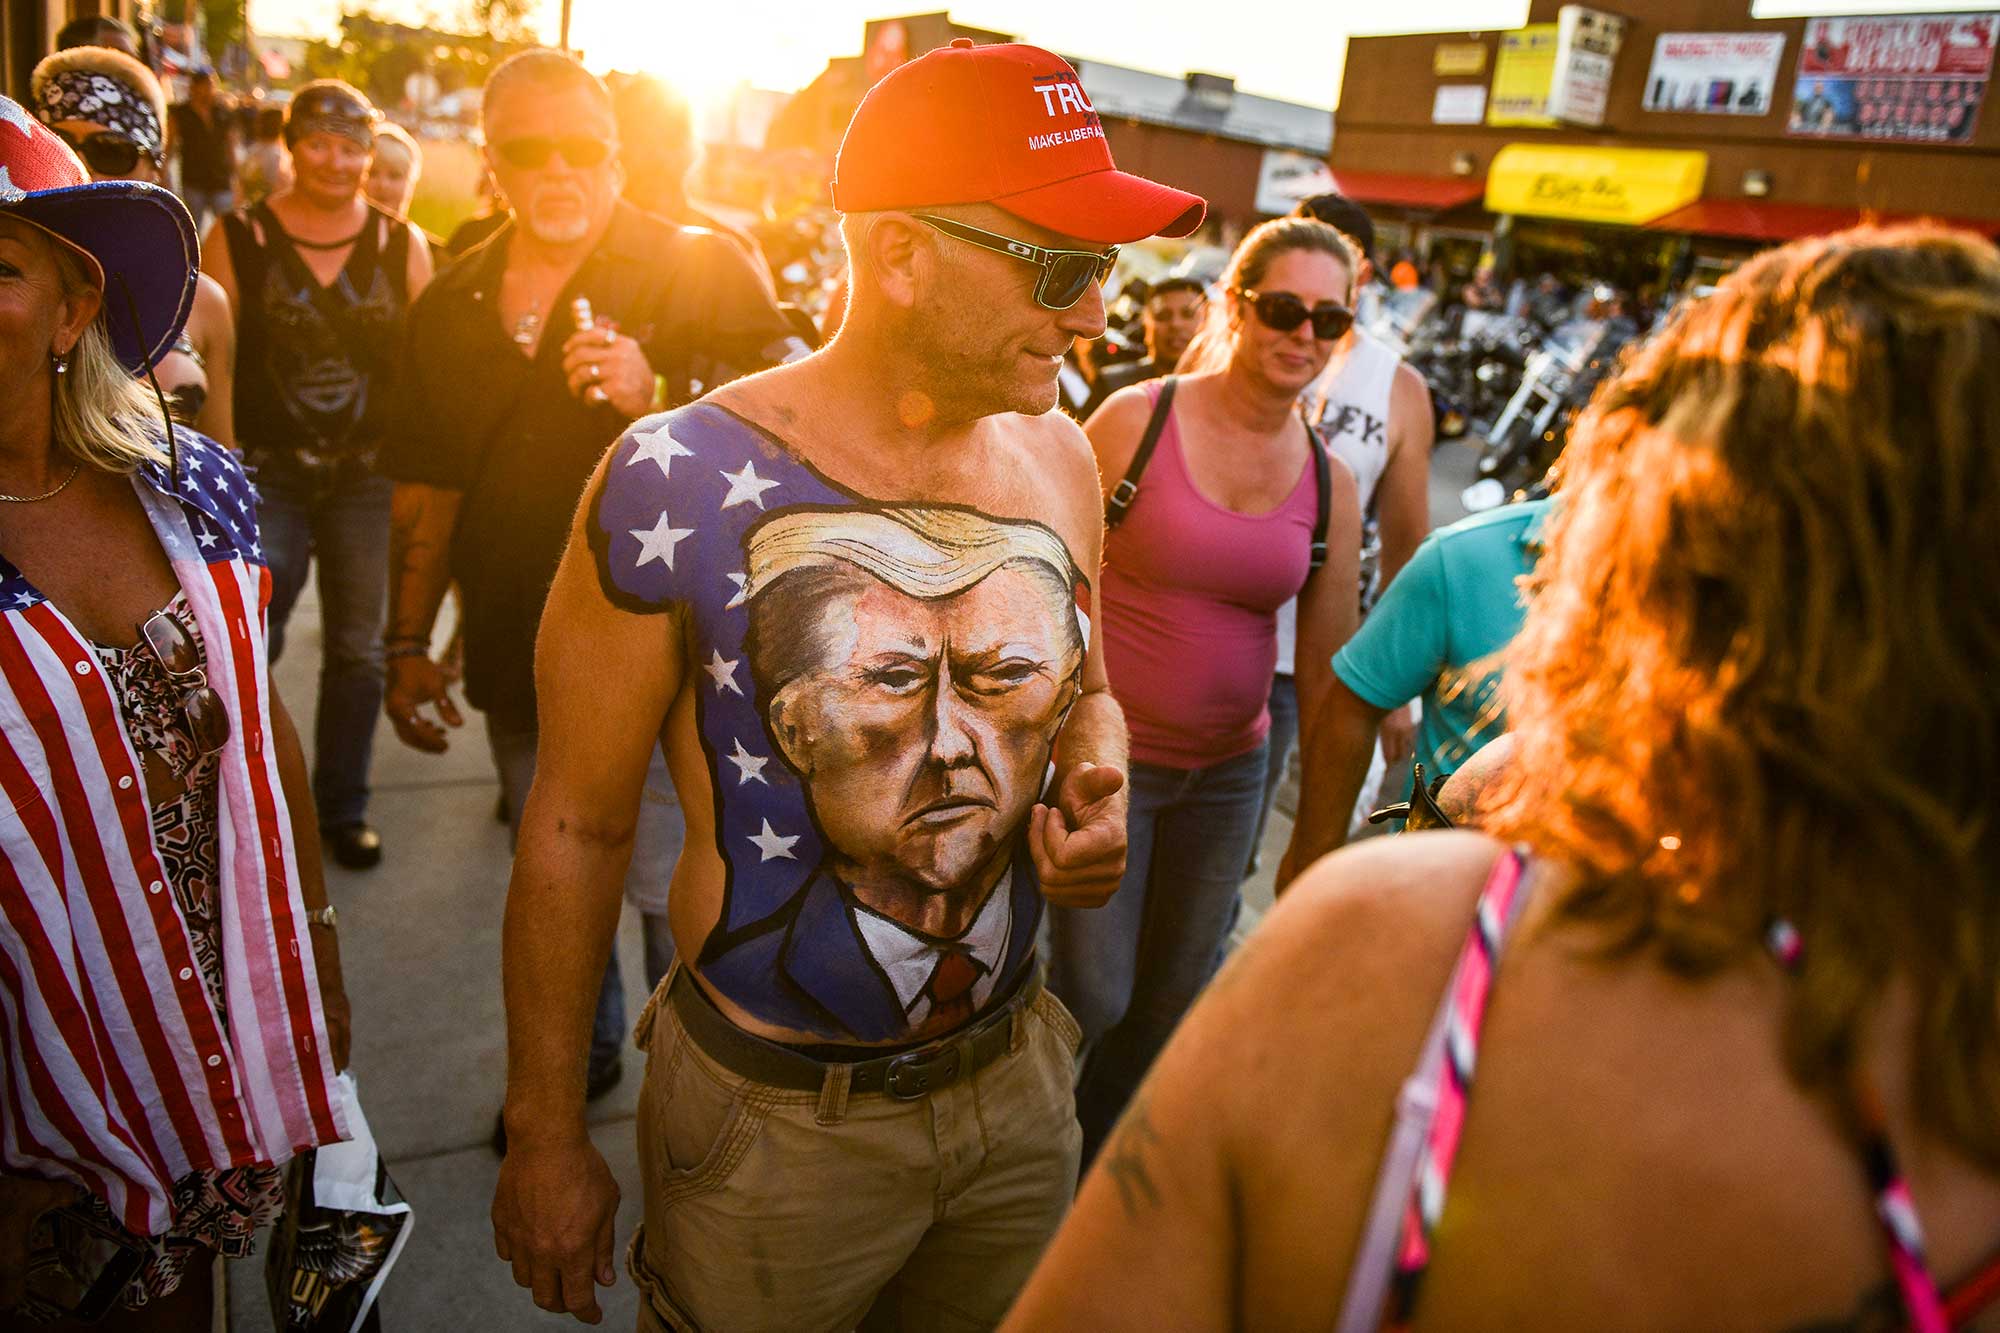 Johne Riley walks down Main Street showing off his chest painted with a portrait of President Trump.